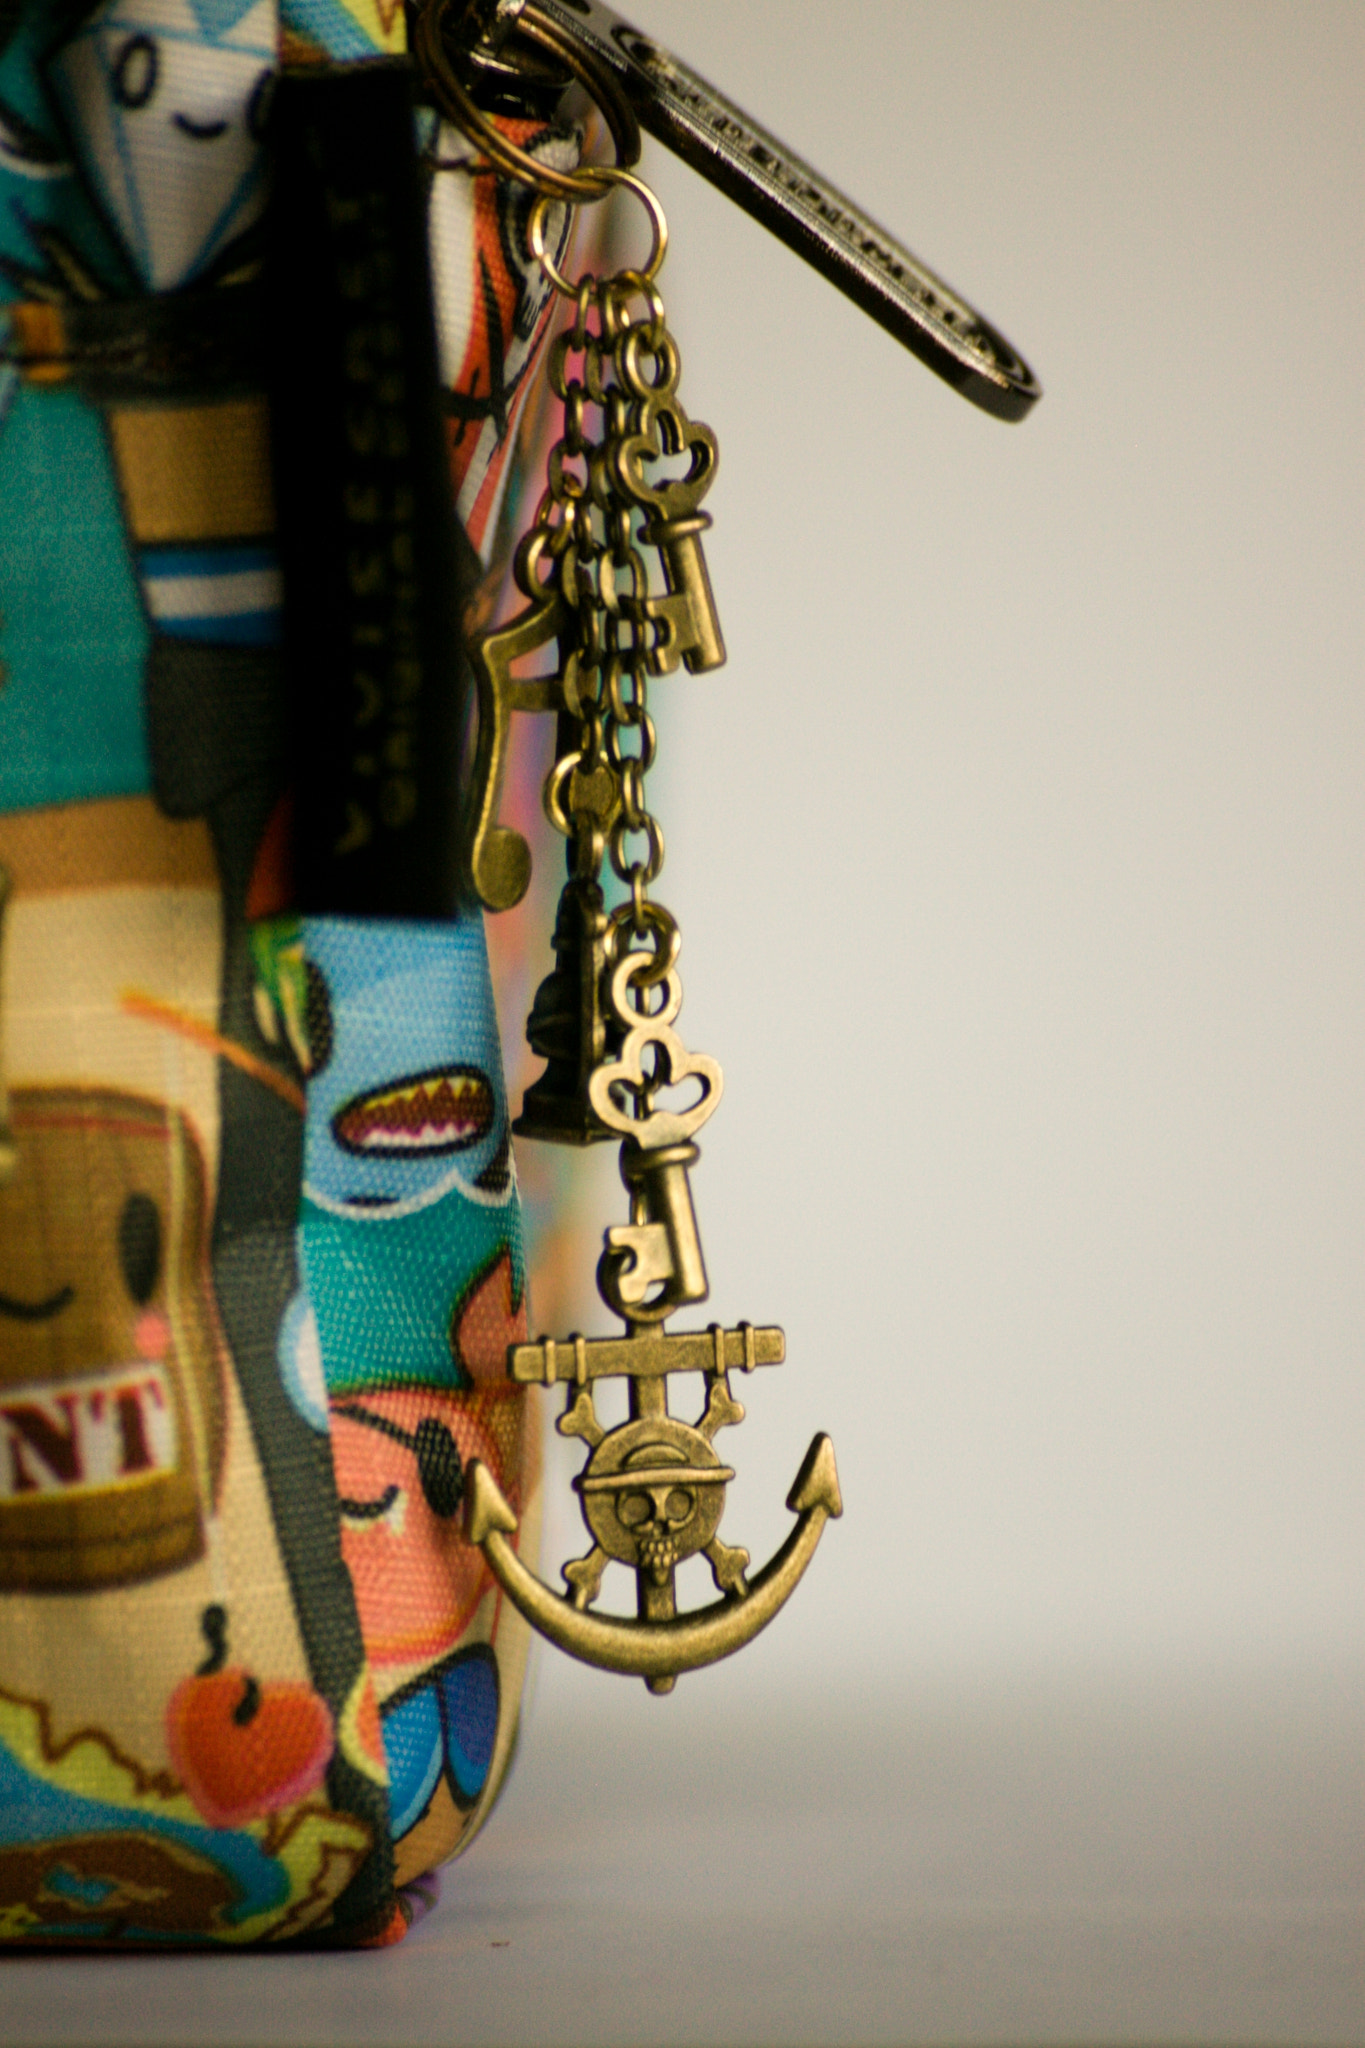 Canon EOS 50D + Sigma 55-200mm f/4-5.6 DC sample photo. Pirate's lullaby charm pendant photography